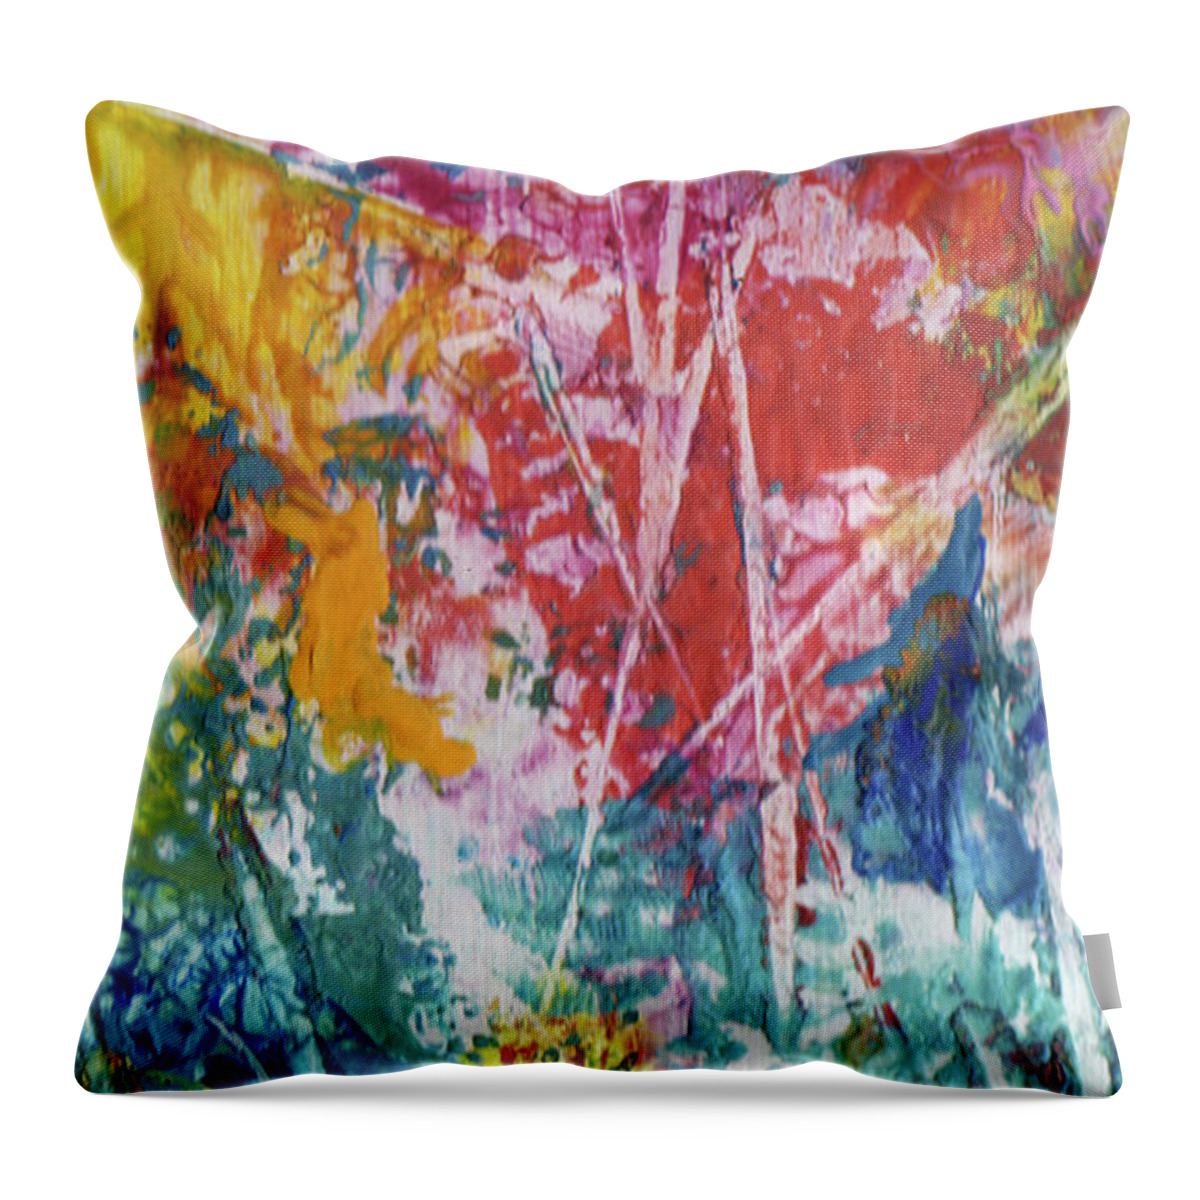 Colorful Abstract Throw Pillow featuring the painting Autumn Glory - detail by Jean Batzell Fitzgerald